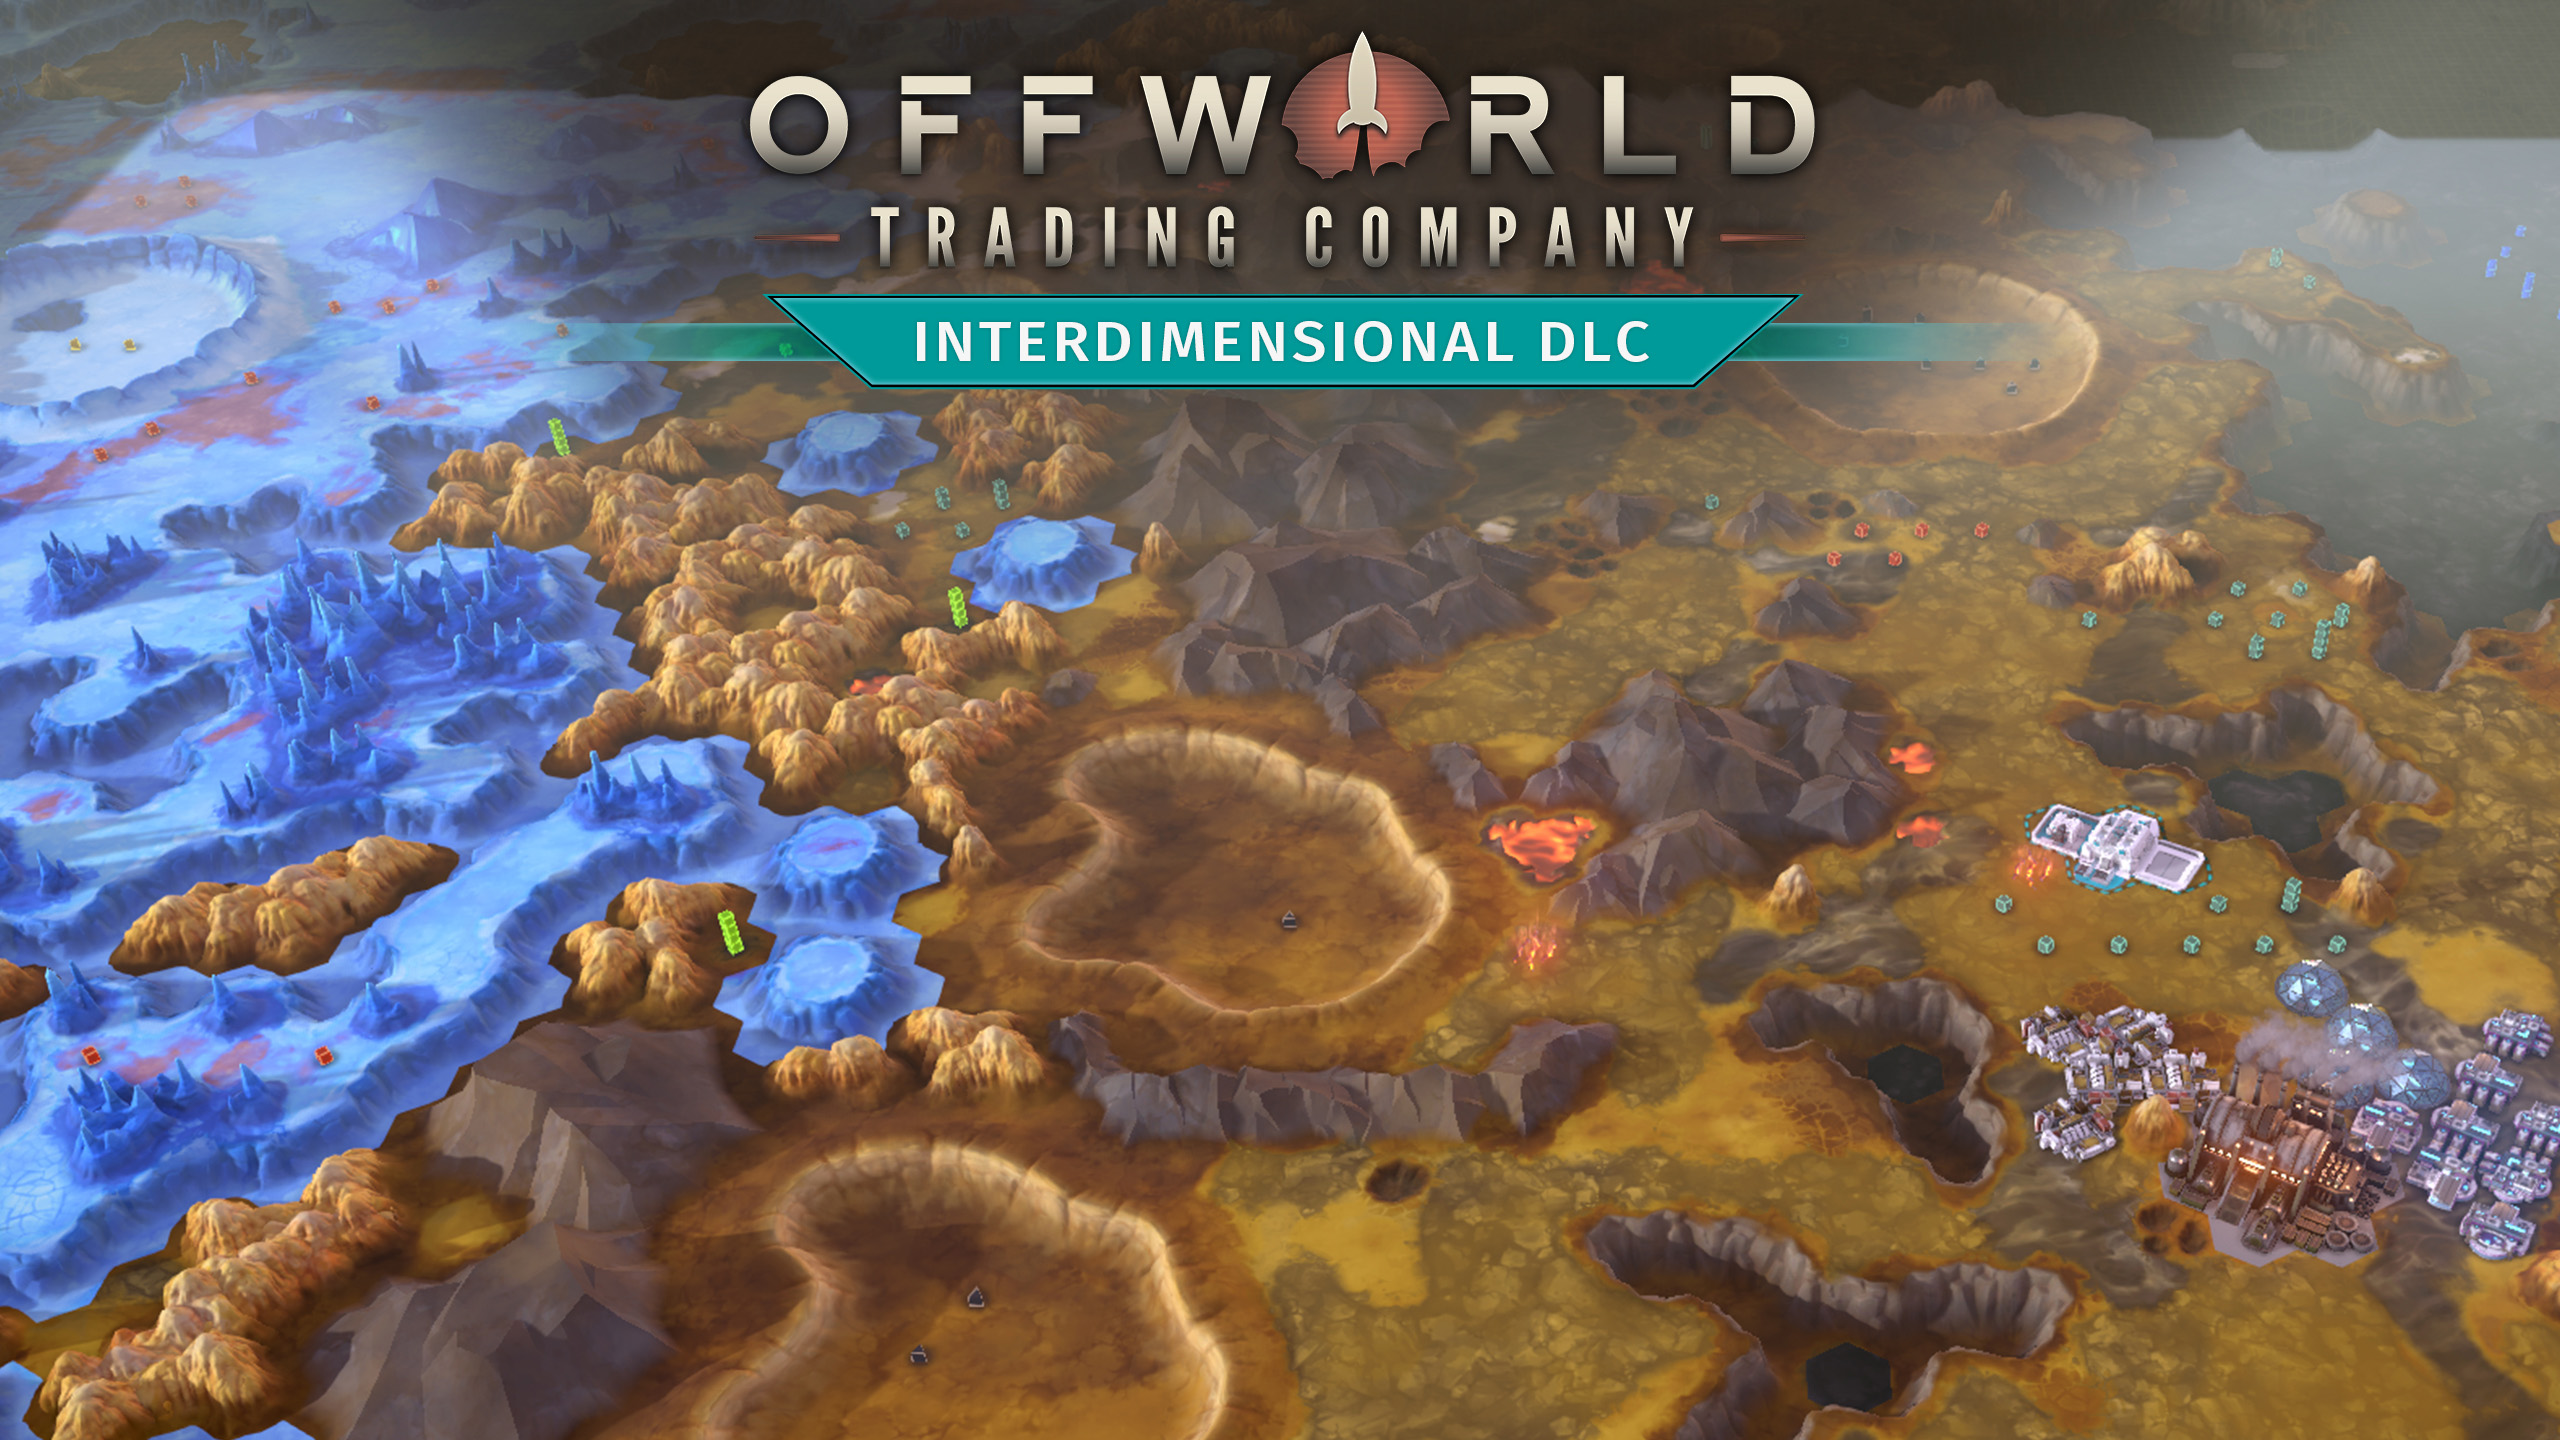 offworld trading company logging into multiplayer services